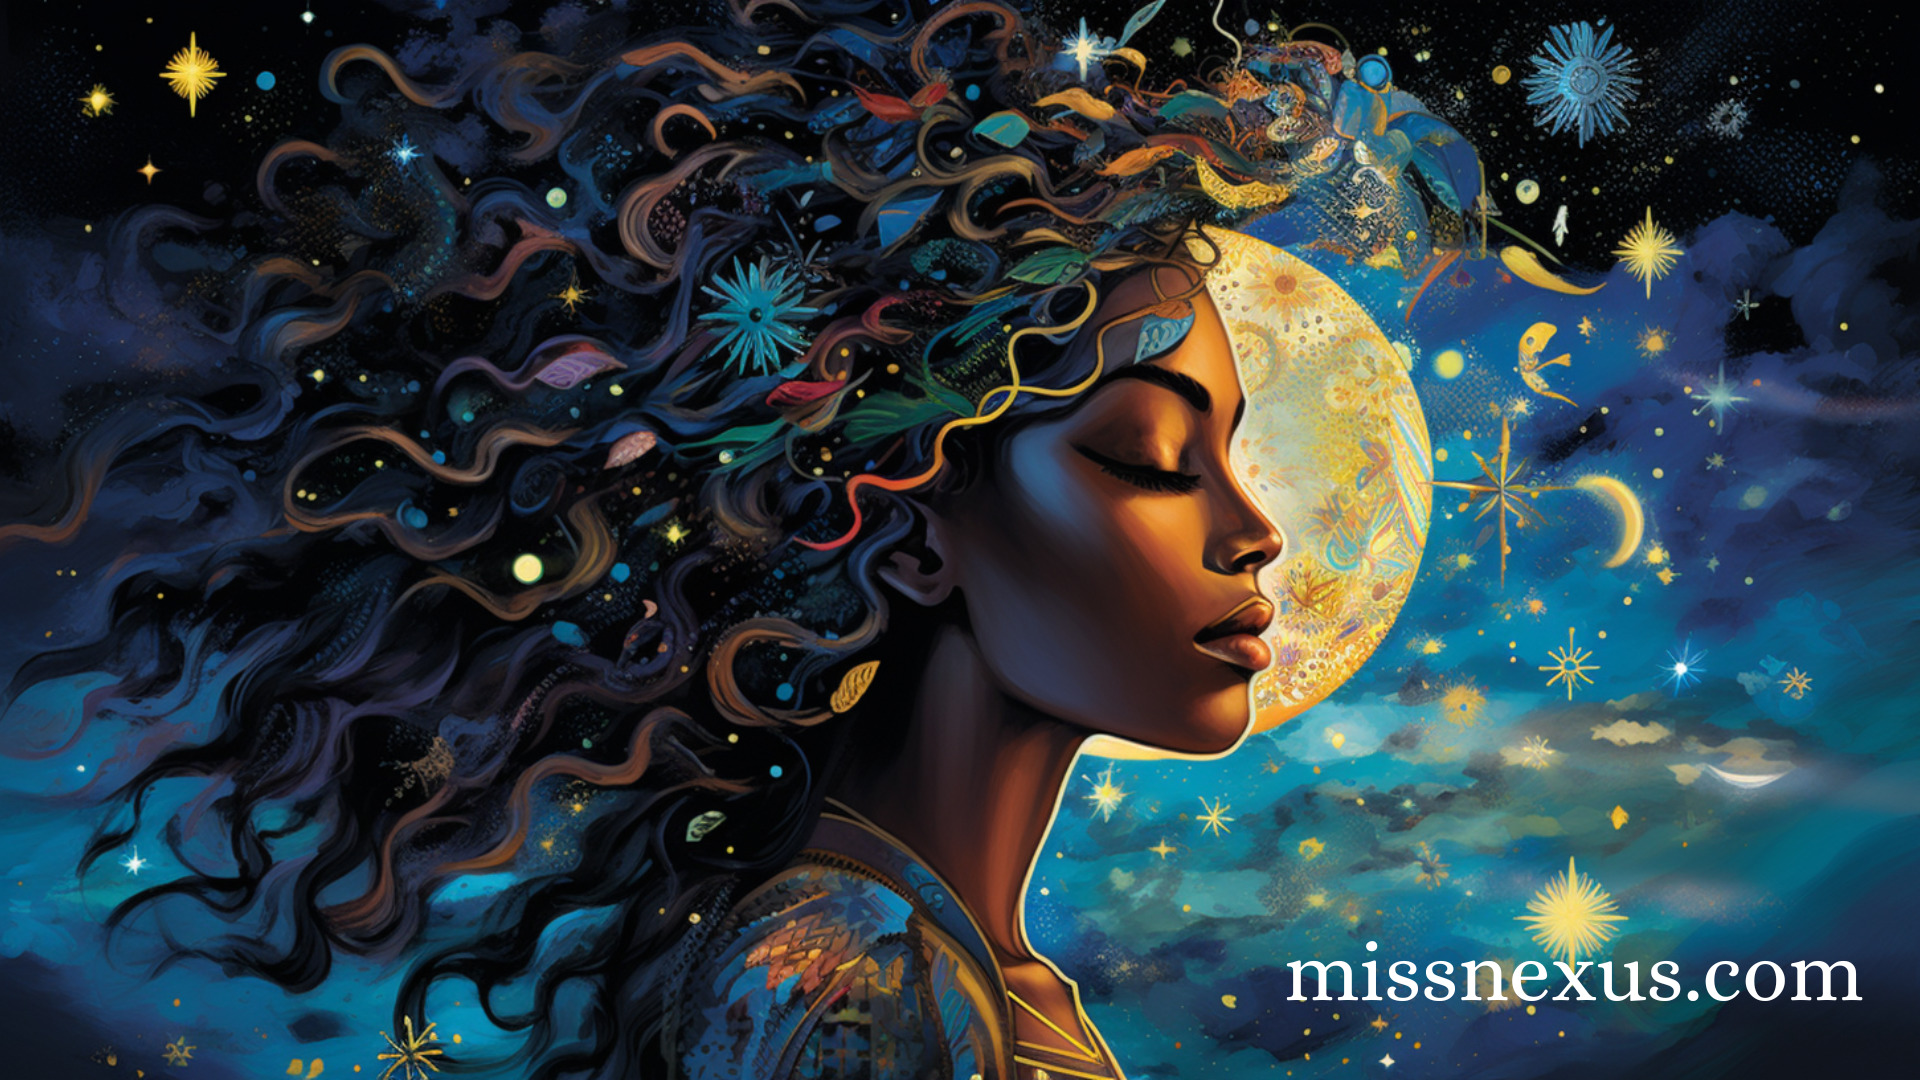 Amidst the shimmering moonlit night, under the celestial dance of the Full Moon in Aquarius, stands a young Black girl, a luminous beacon of authenticity and power. Her eyes, aglow with the wisdom of the ages, reflect the Universe's embrace, as her spirit radiates a kaleidoscope of vibrant hues that blend the colors of hope and possibility.